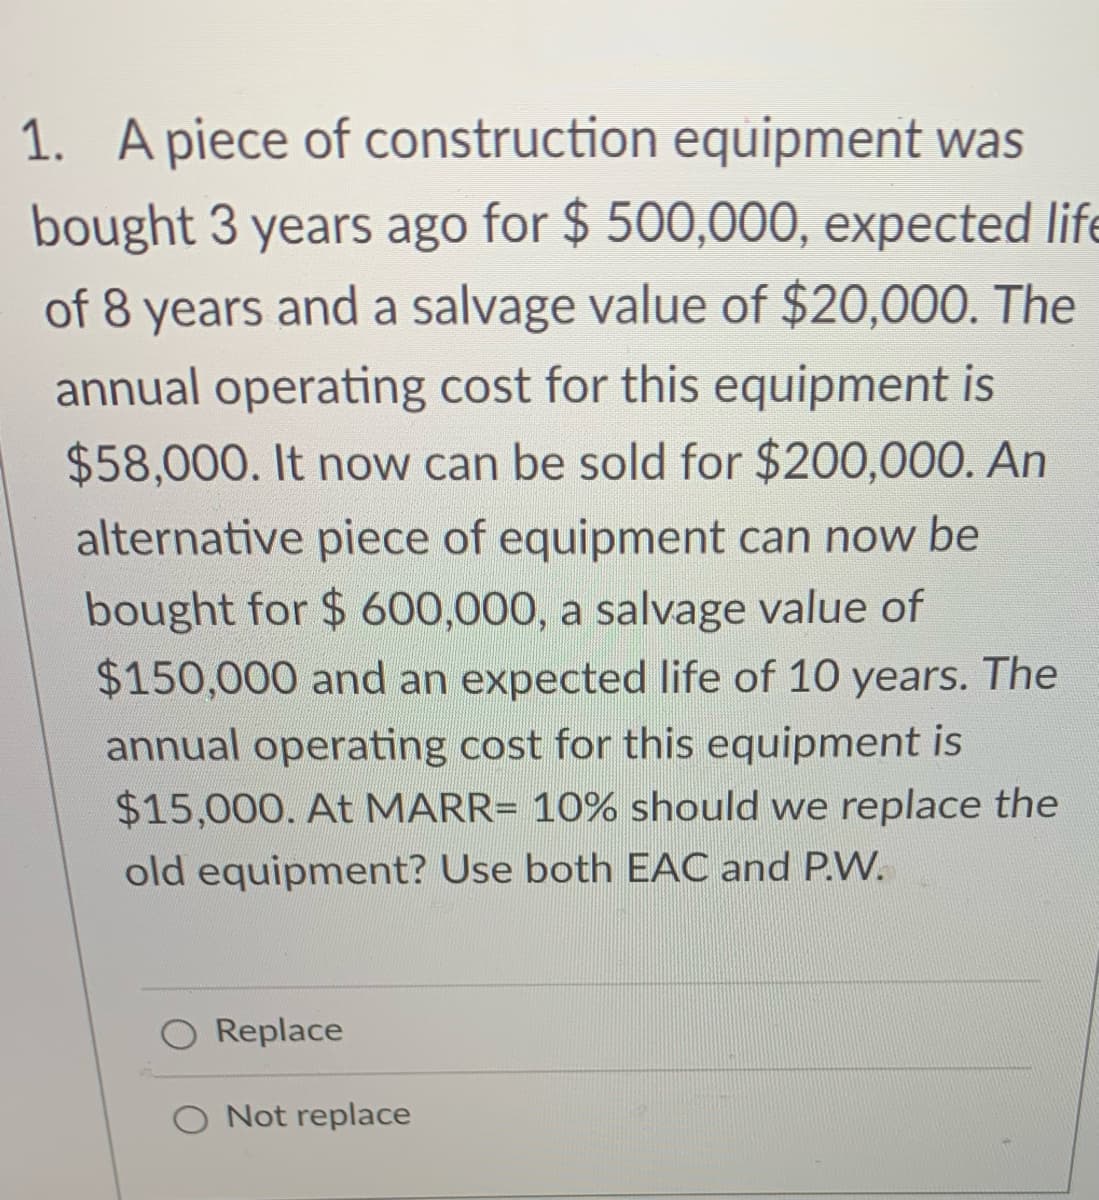 1. A piece of construction equipment was
bought 3 years ago for $ 500,000, expected life
of 8 years and a salvage value of $20,000. The
annual operating cost for this equipment is
$58,000. It now can be sold for $200,000. An
alternative piece of equipment can now be
bought for $ 600,000, a salvage value of
$150,000 and an expected life of 10 years. The
annual operating cost for this equipment is
$15,000. At MARR= 10% should we replace the
old equipment? Use both EAC and P.W.
Replace
O Not replace
